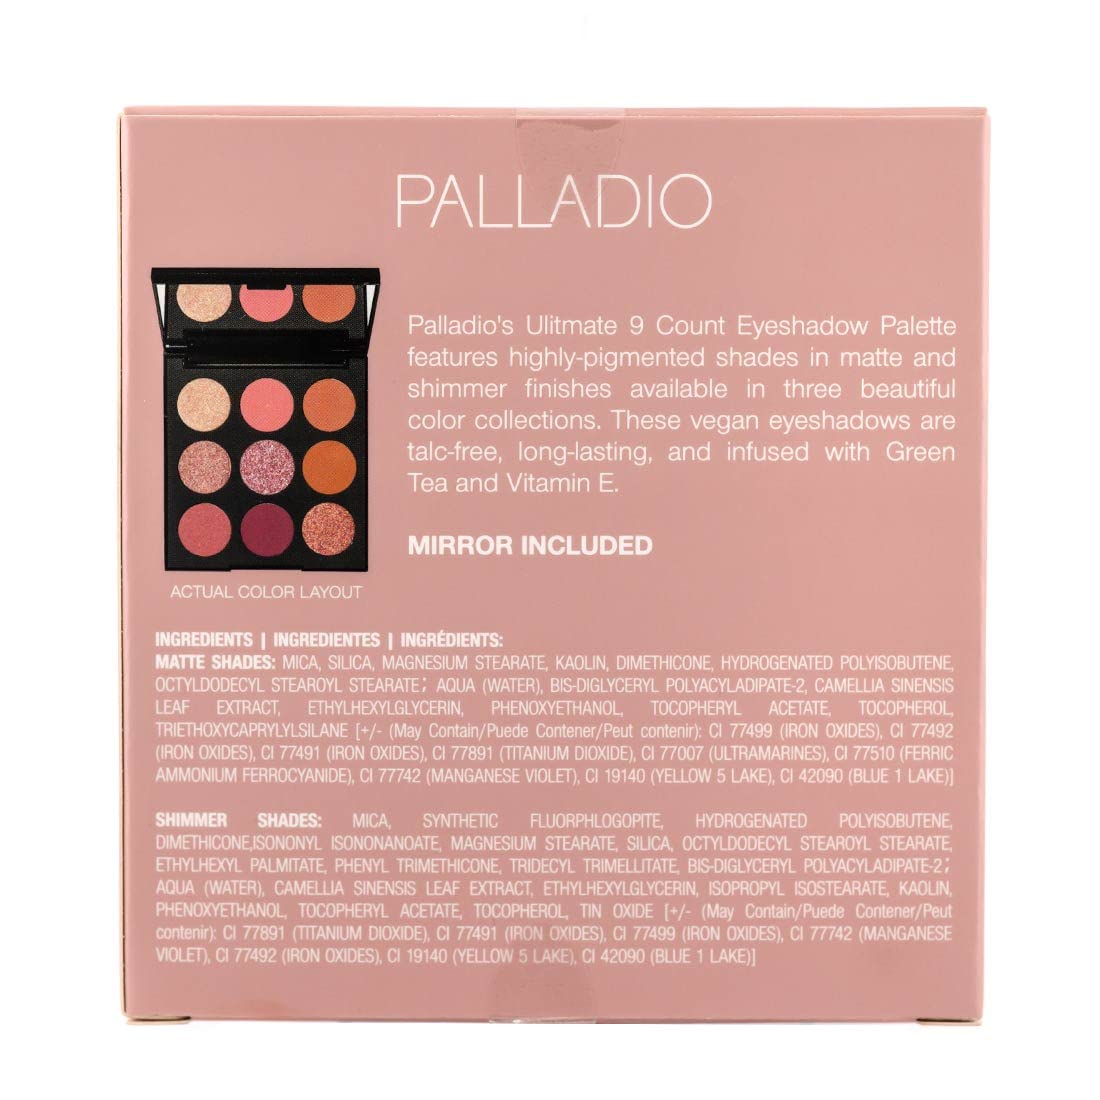 Palladio Ultimate 9-Count Eyeshadow Palette, Talc-Free Formula, High Pigmented Shades in A Mix of Matte & Shimmer Finishes, Blendable Long Lasting Colorful Professional-Grade Makeup (Rosey Nudes)